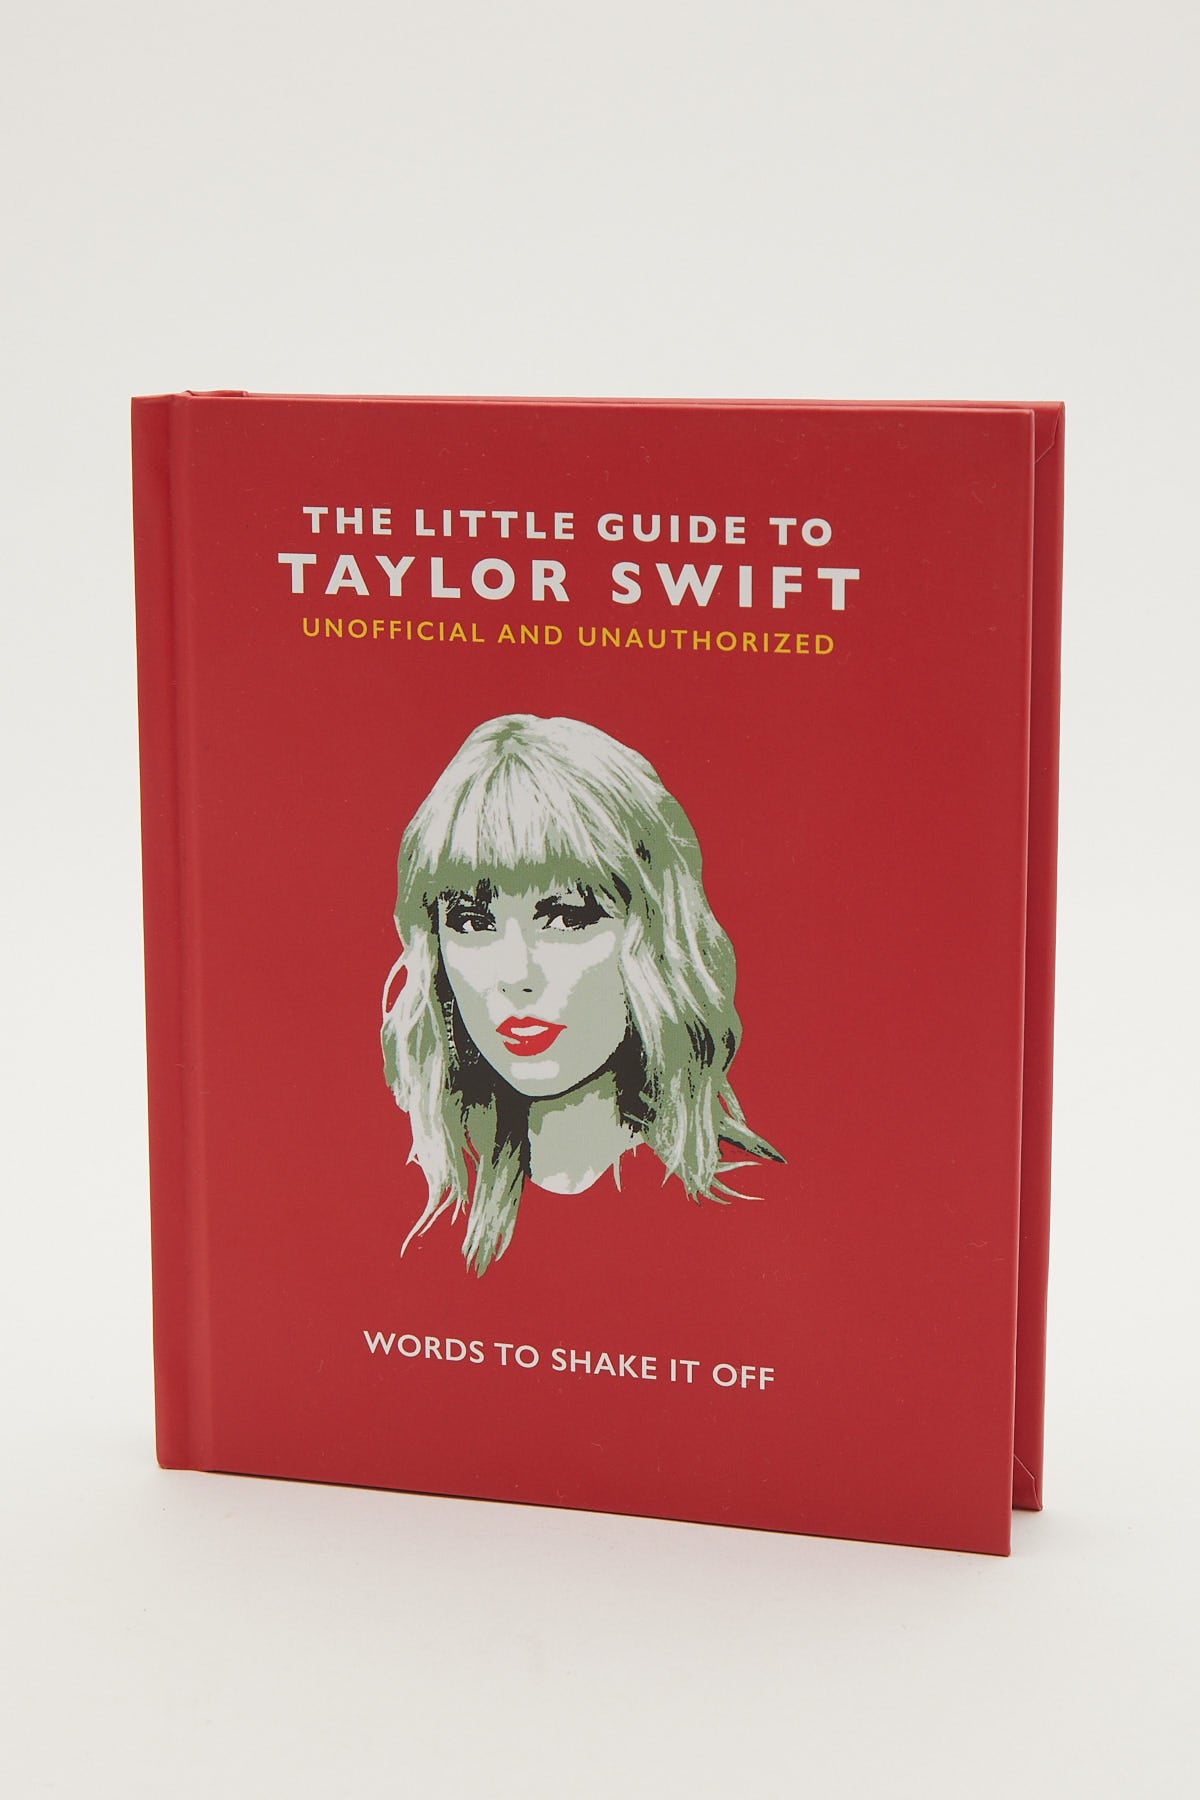 The Little Guide to Taylor Swift Multi